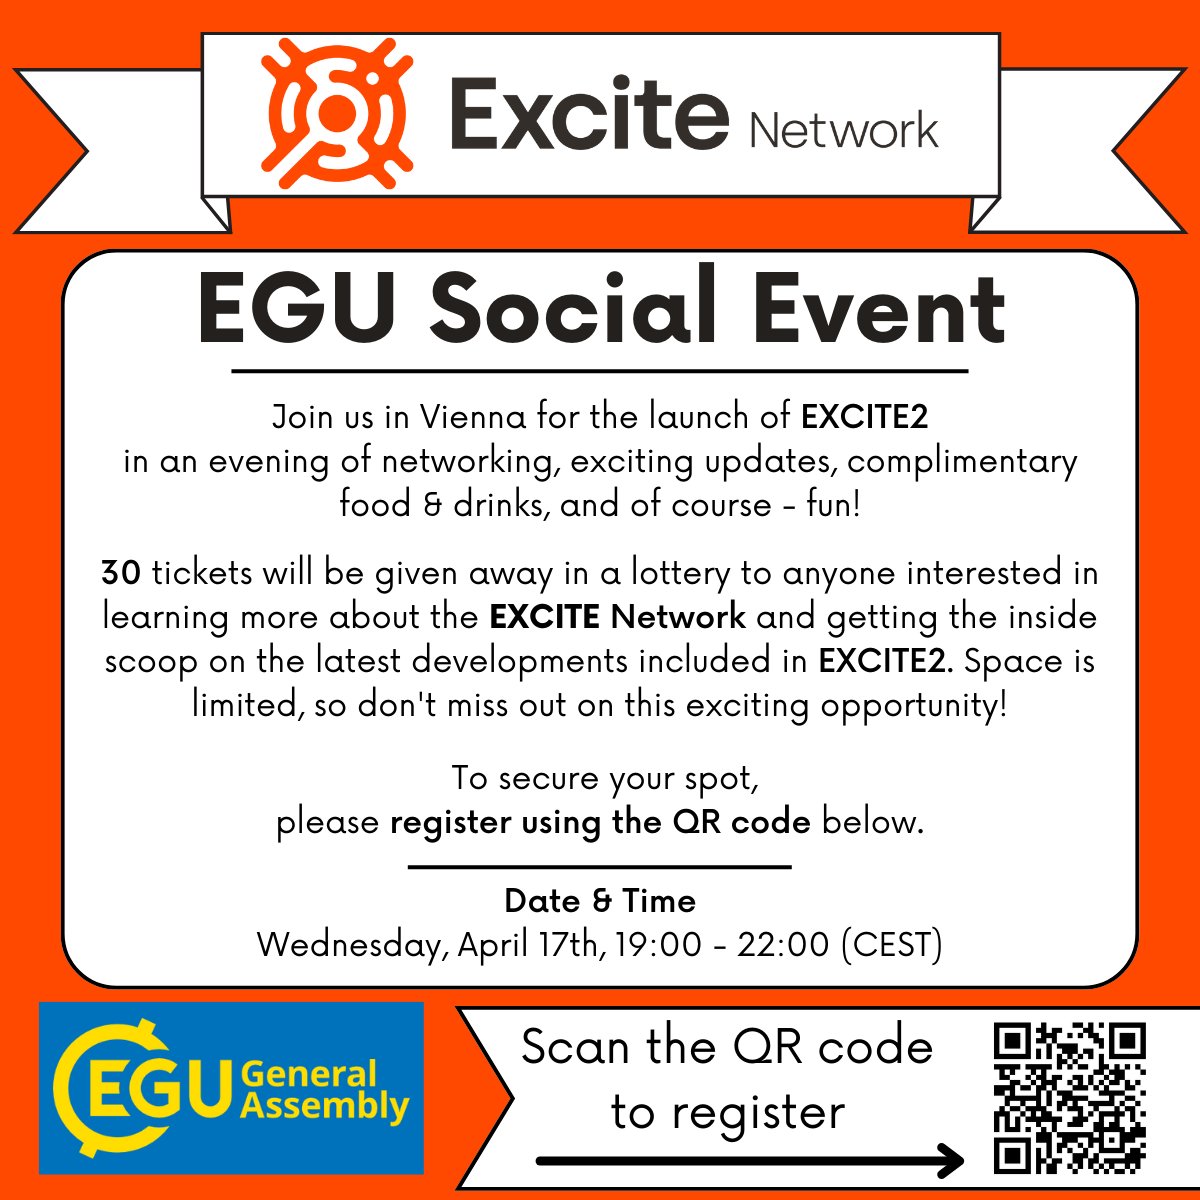 Ready for an unforgettable evening at EGU 2024 in Vienna? We are thrilled to invite you to an exclusive social event for the launch of EXCITE2 packed with networking, free food & drinks, and fun! @EuroGeosciences 🎟️Enter the lottery for a chance to win! forms.gle/JJ1FP4m6rb4bL7…